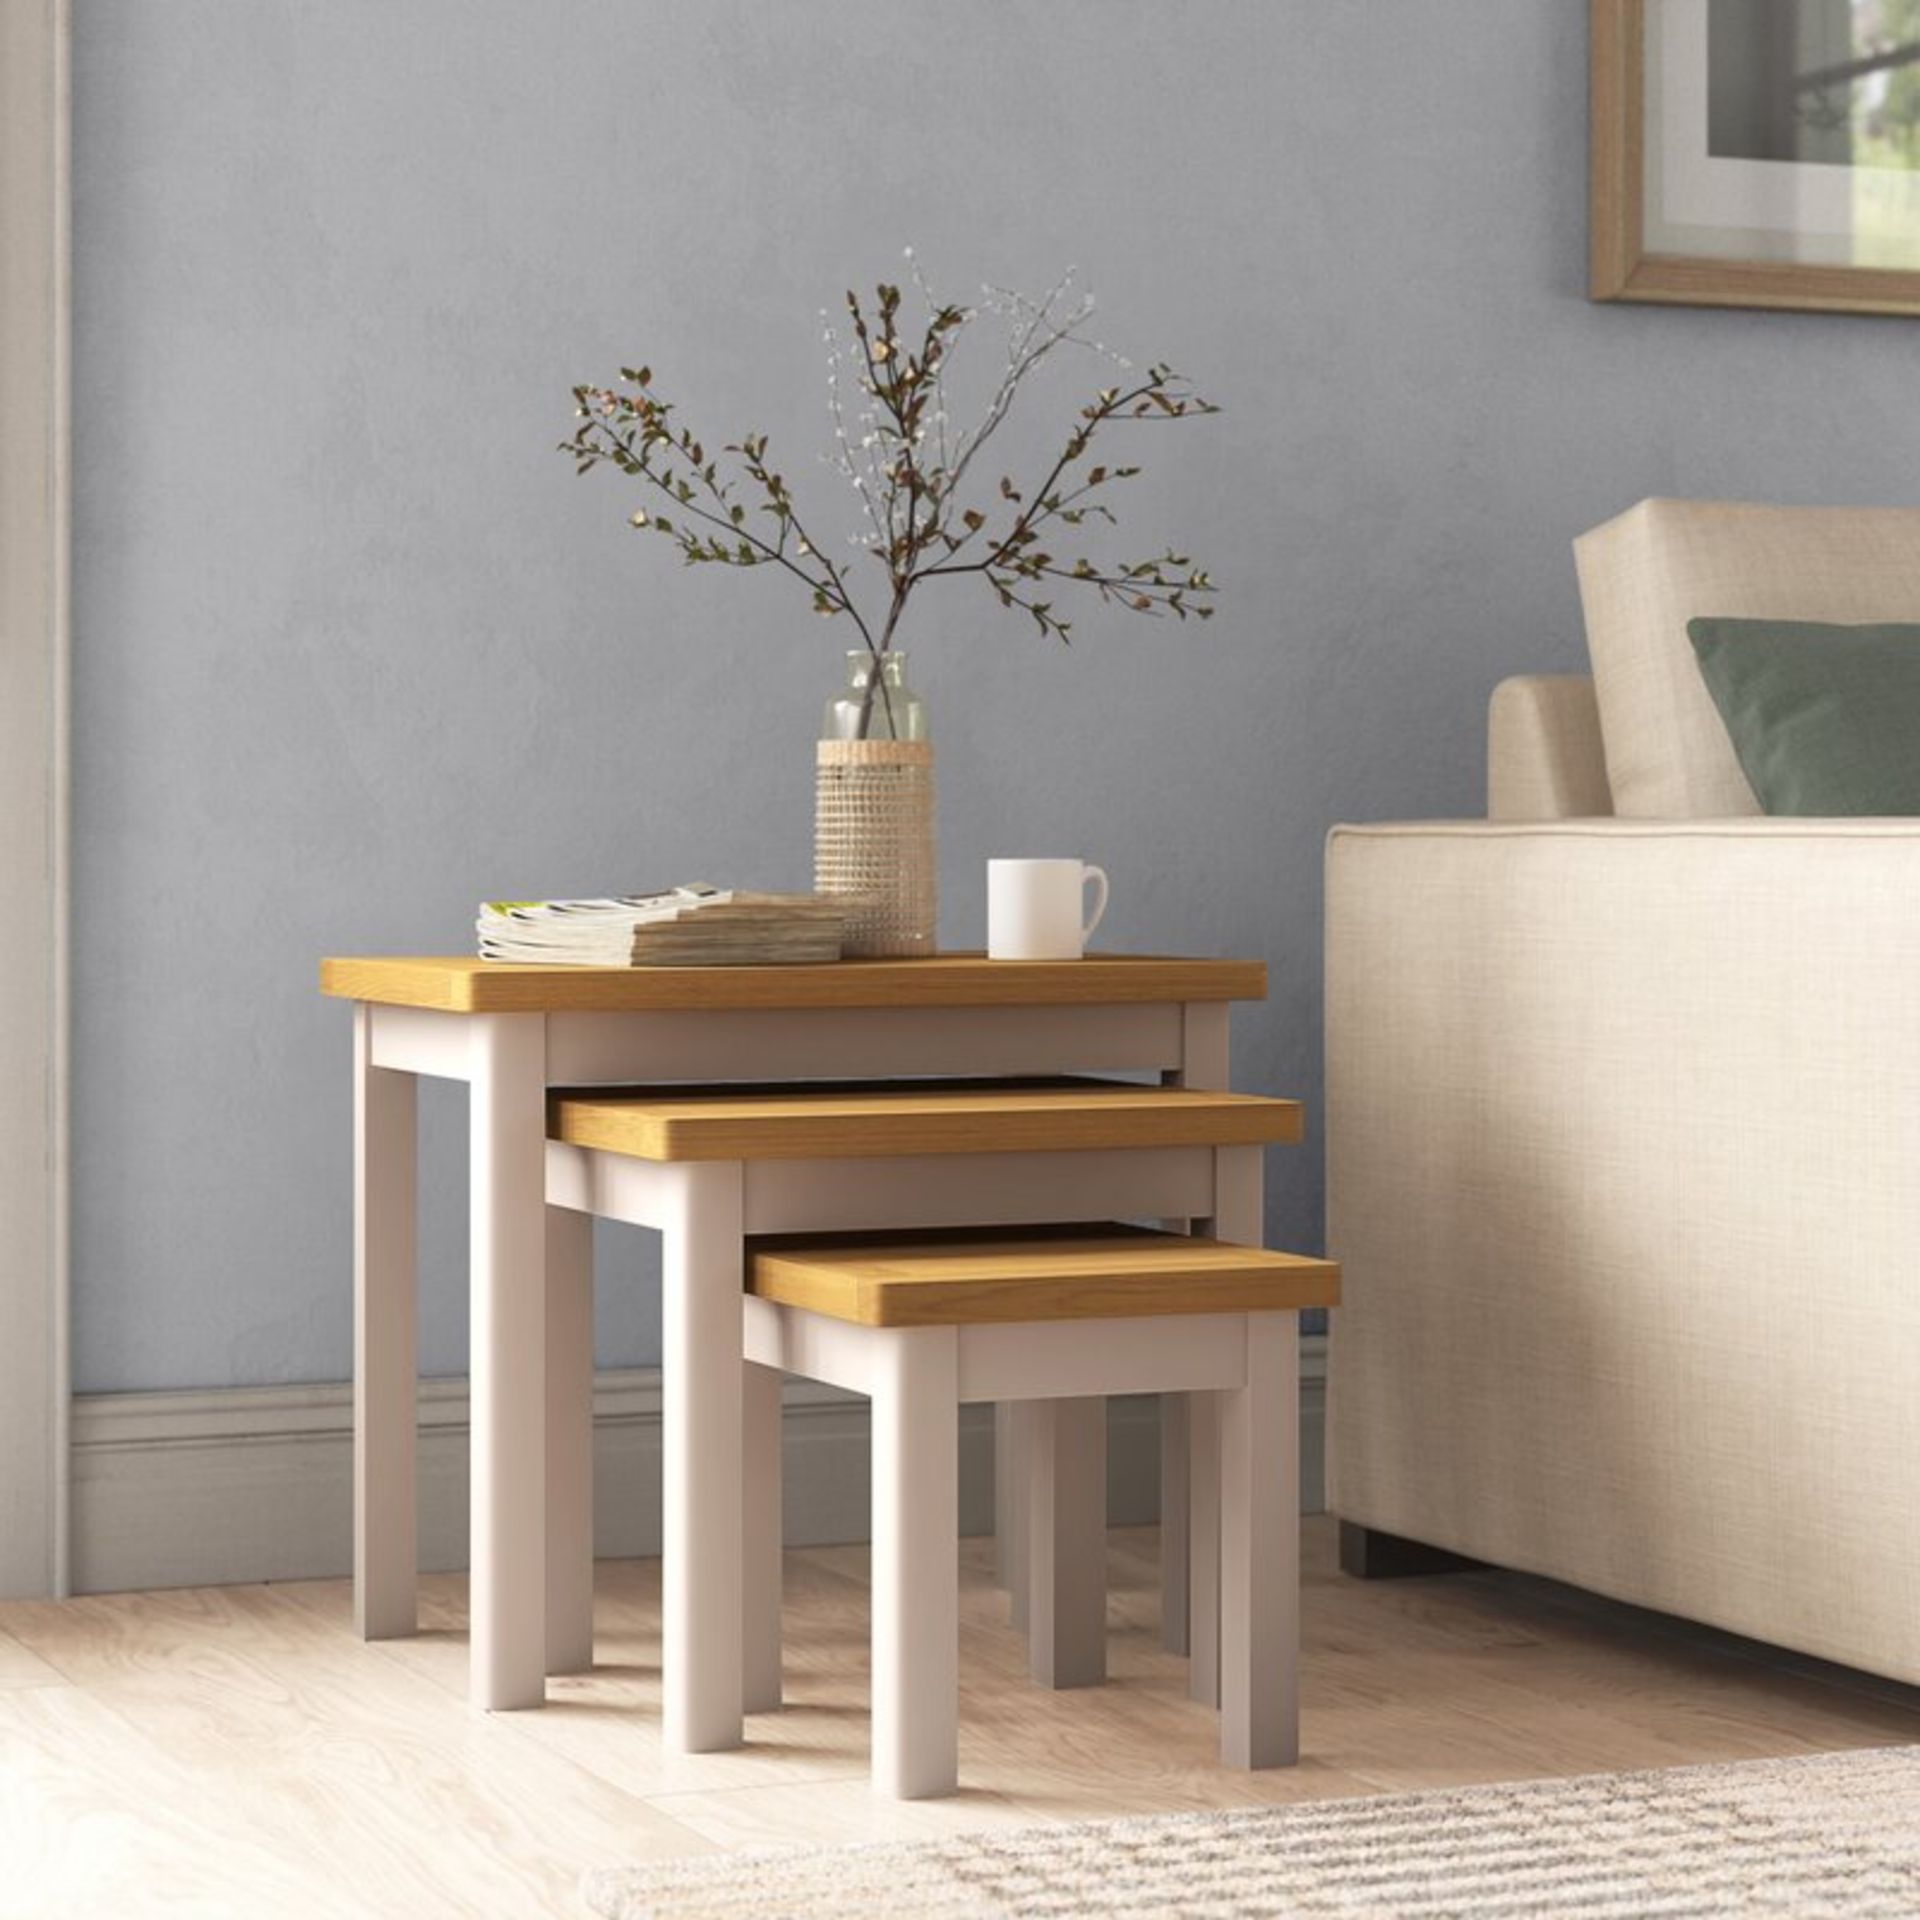 Lille 3 Piece Nest of Tables - RRP £175.99.